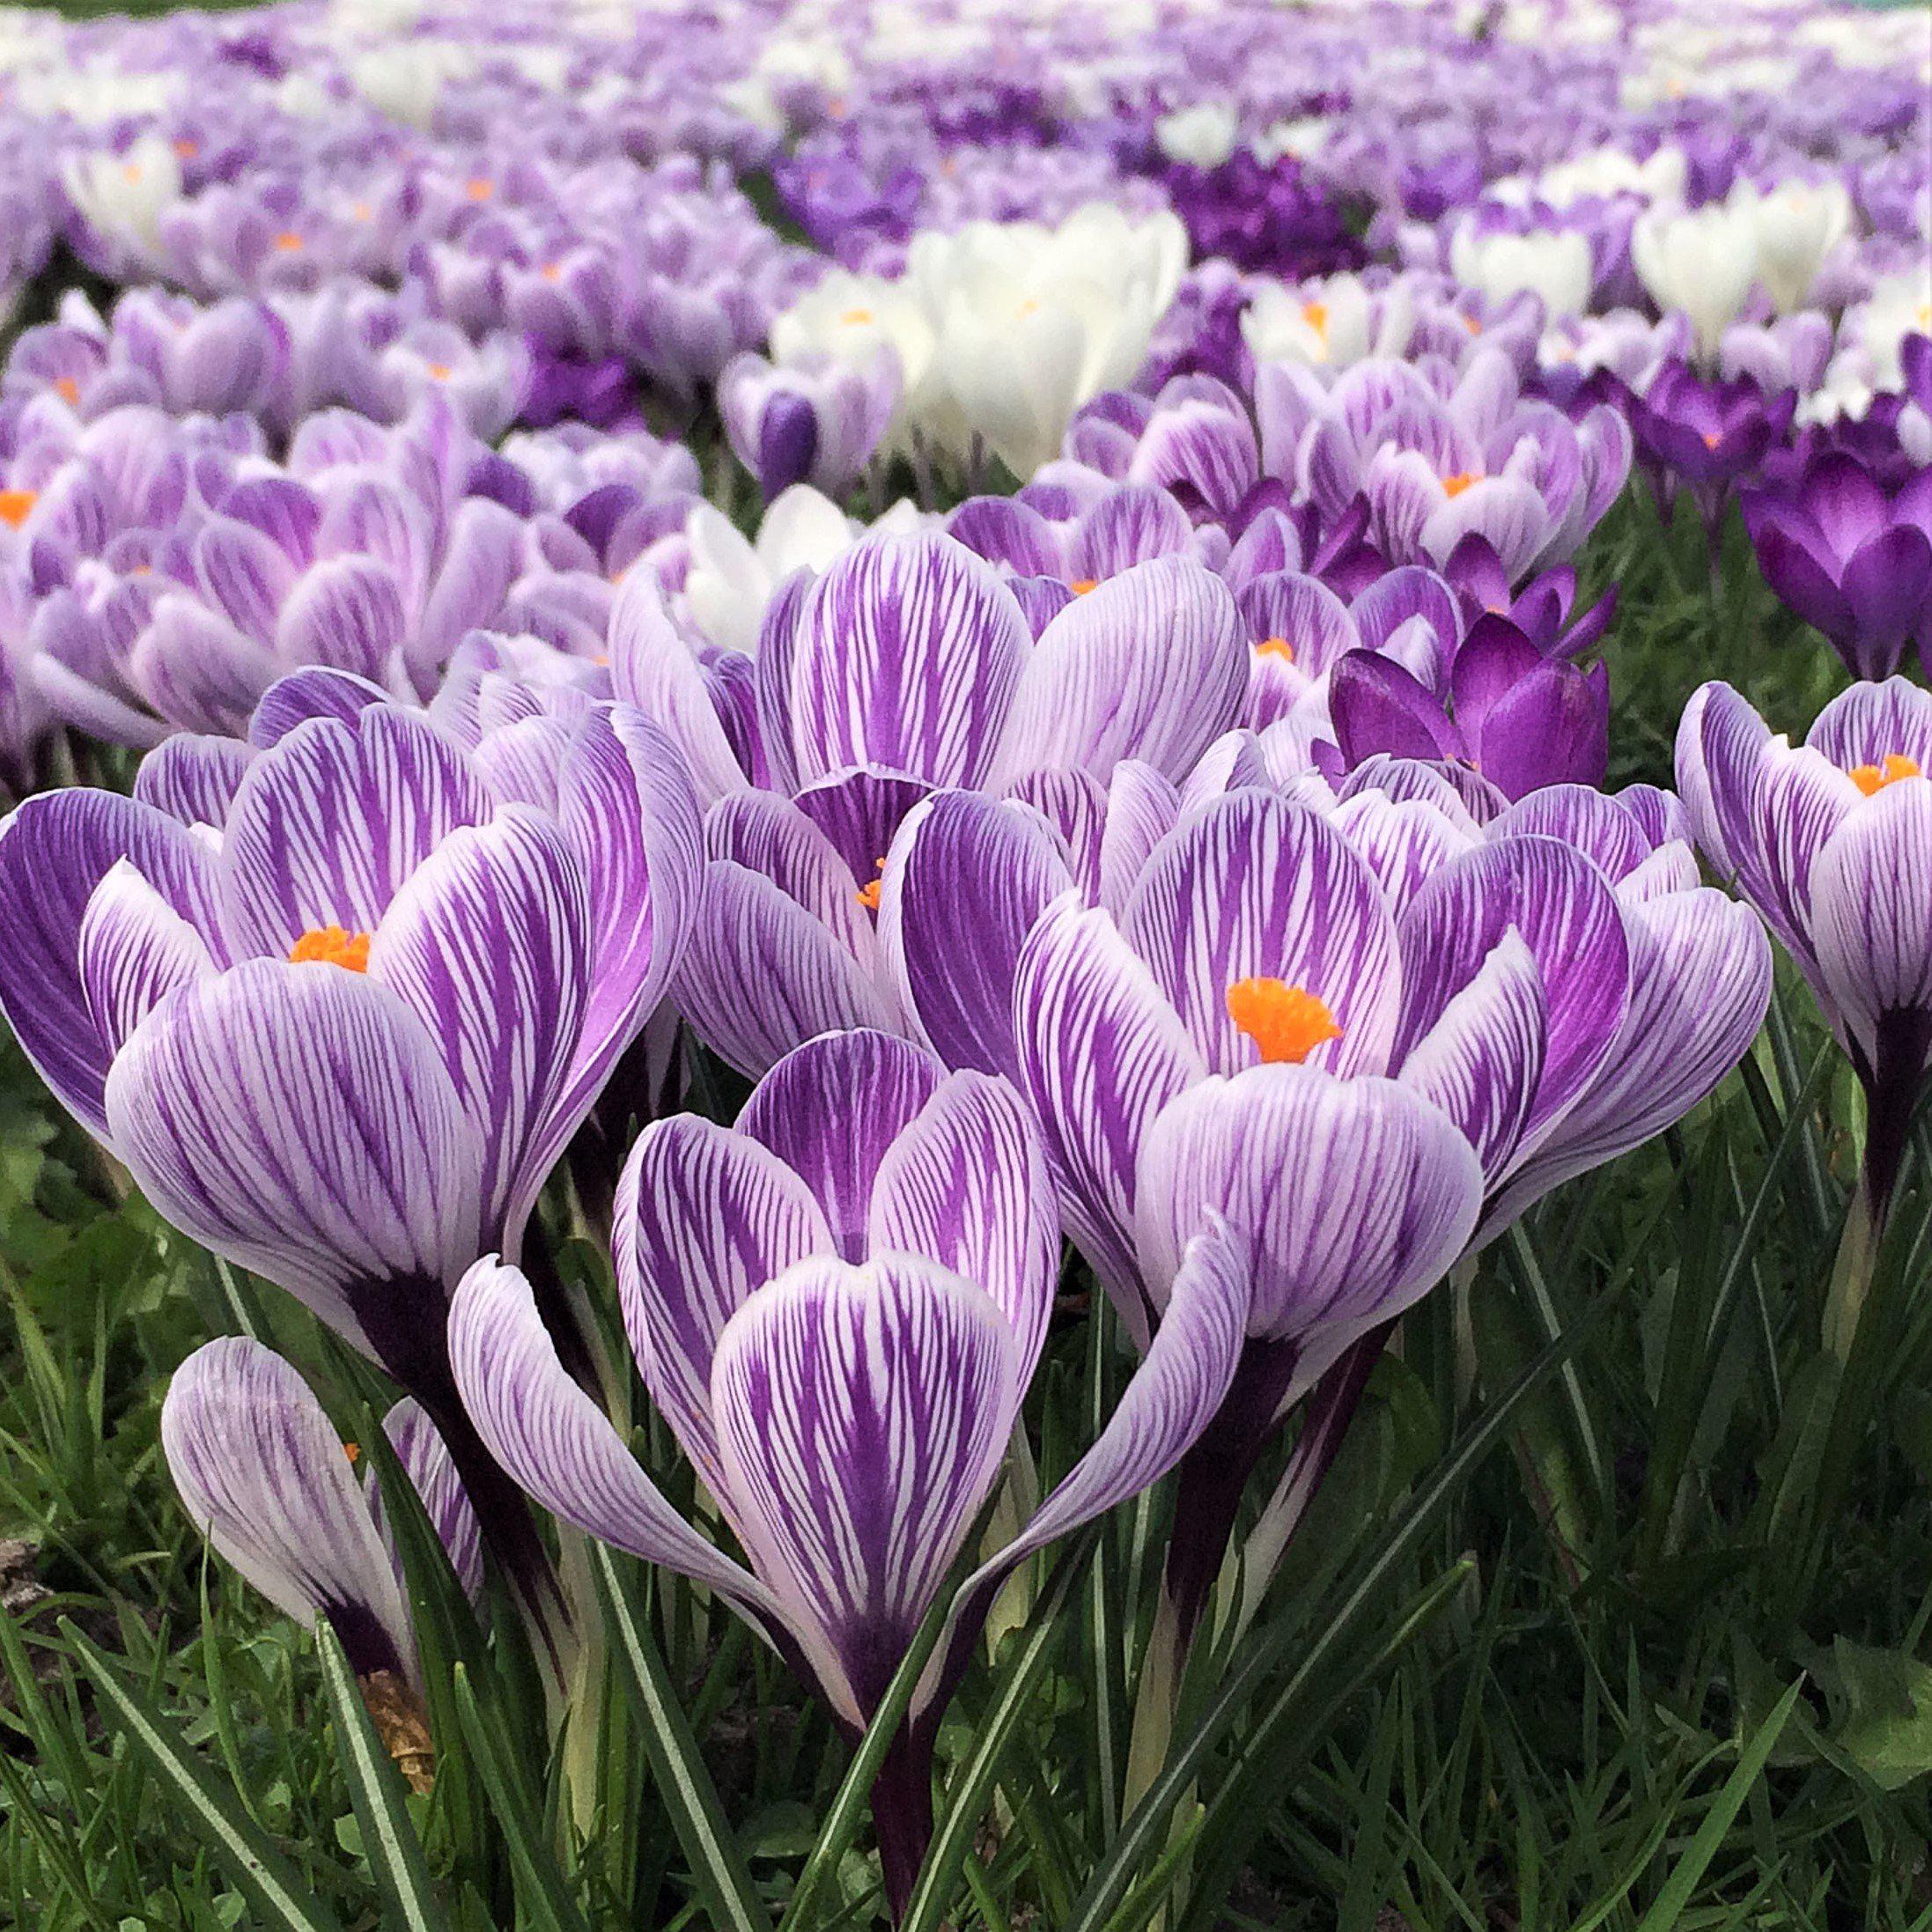 Bold Mixed Crocus Bulbs For Sale Online | Large Flowering Mix – Easy To